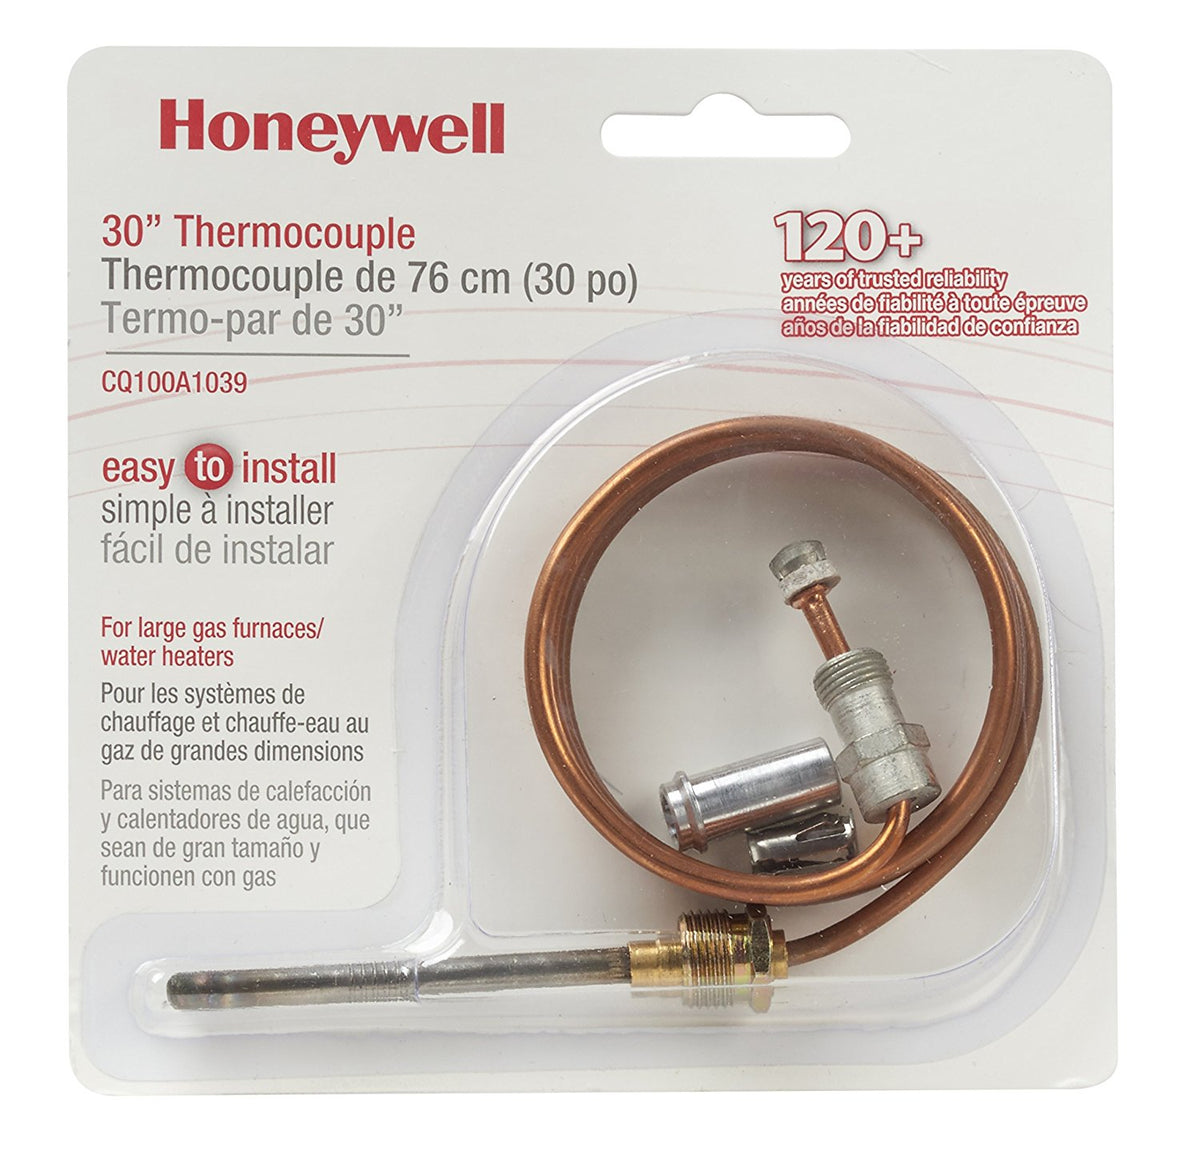 Honeywell CQ100A-1039 Replacement Thermocouple for 30 Millivolt Systems, 30"